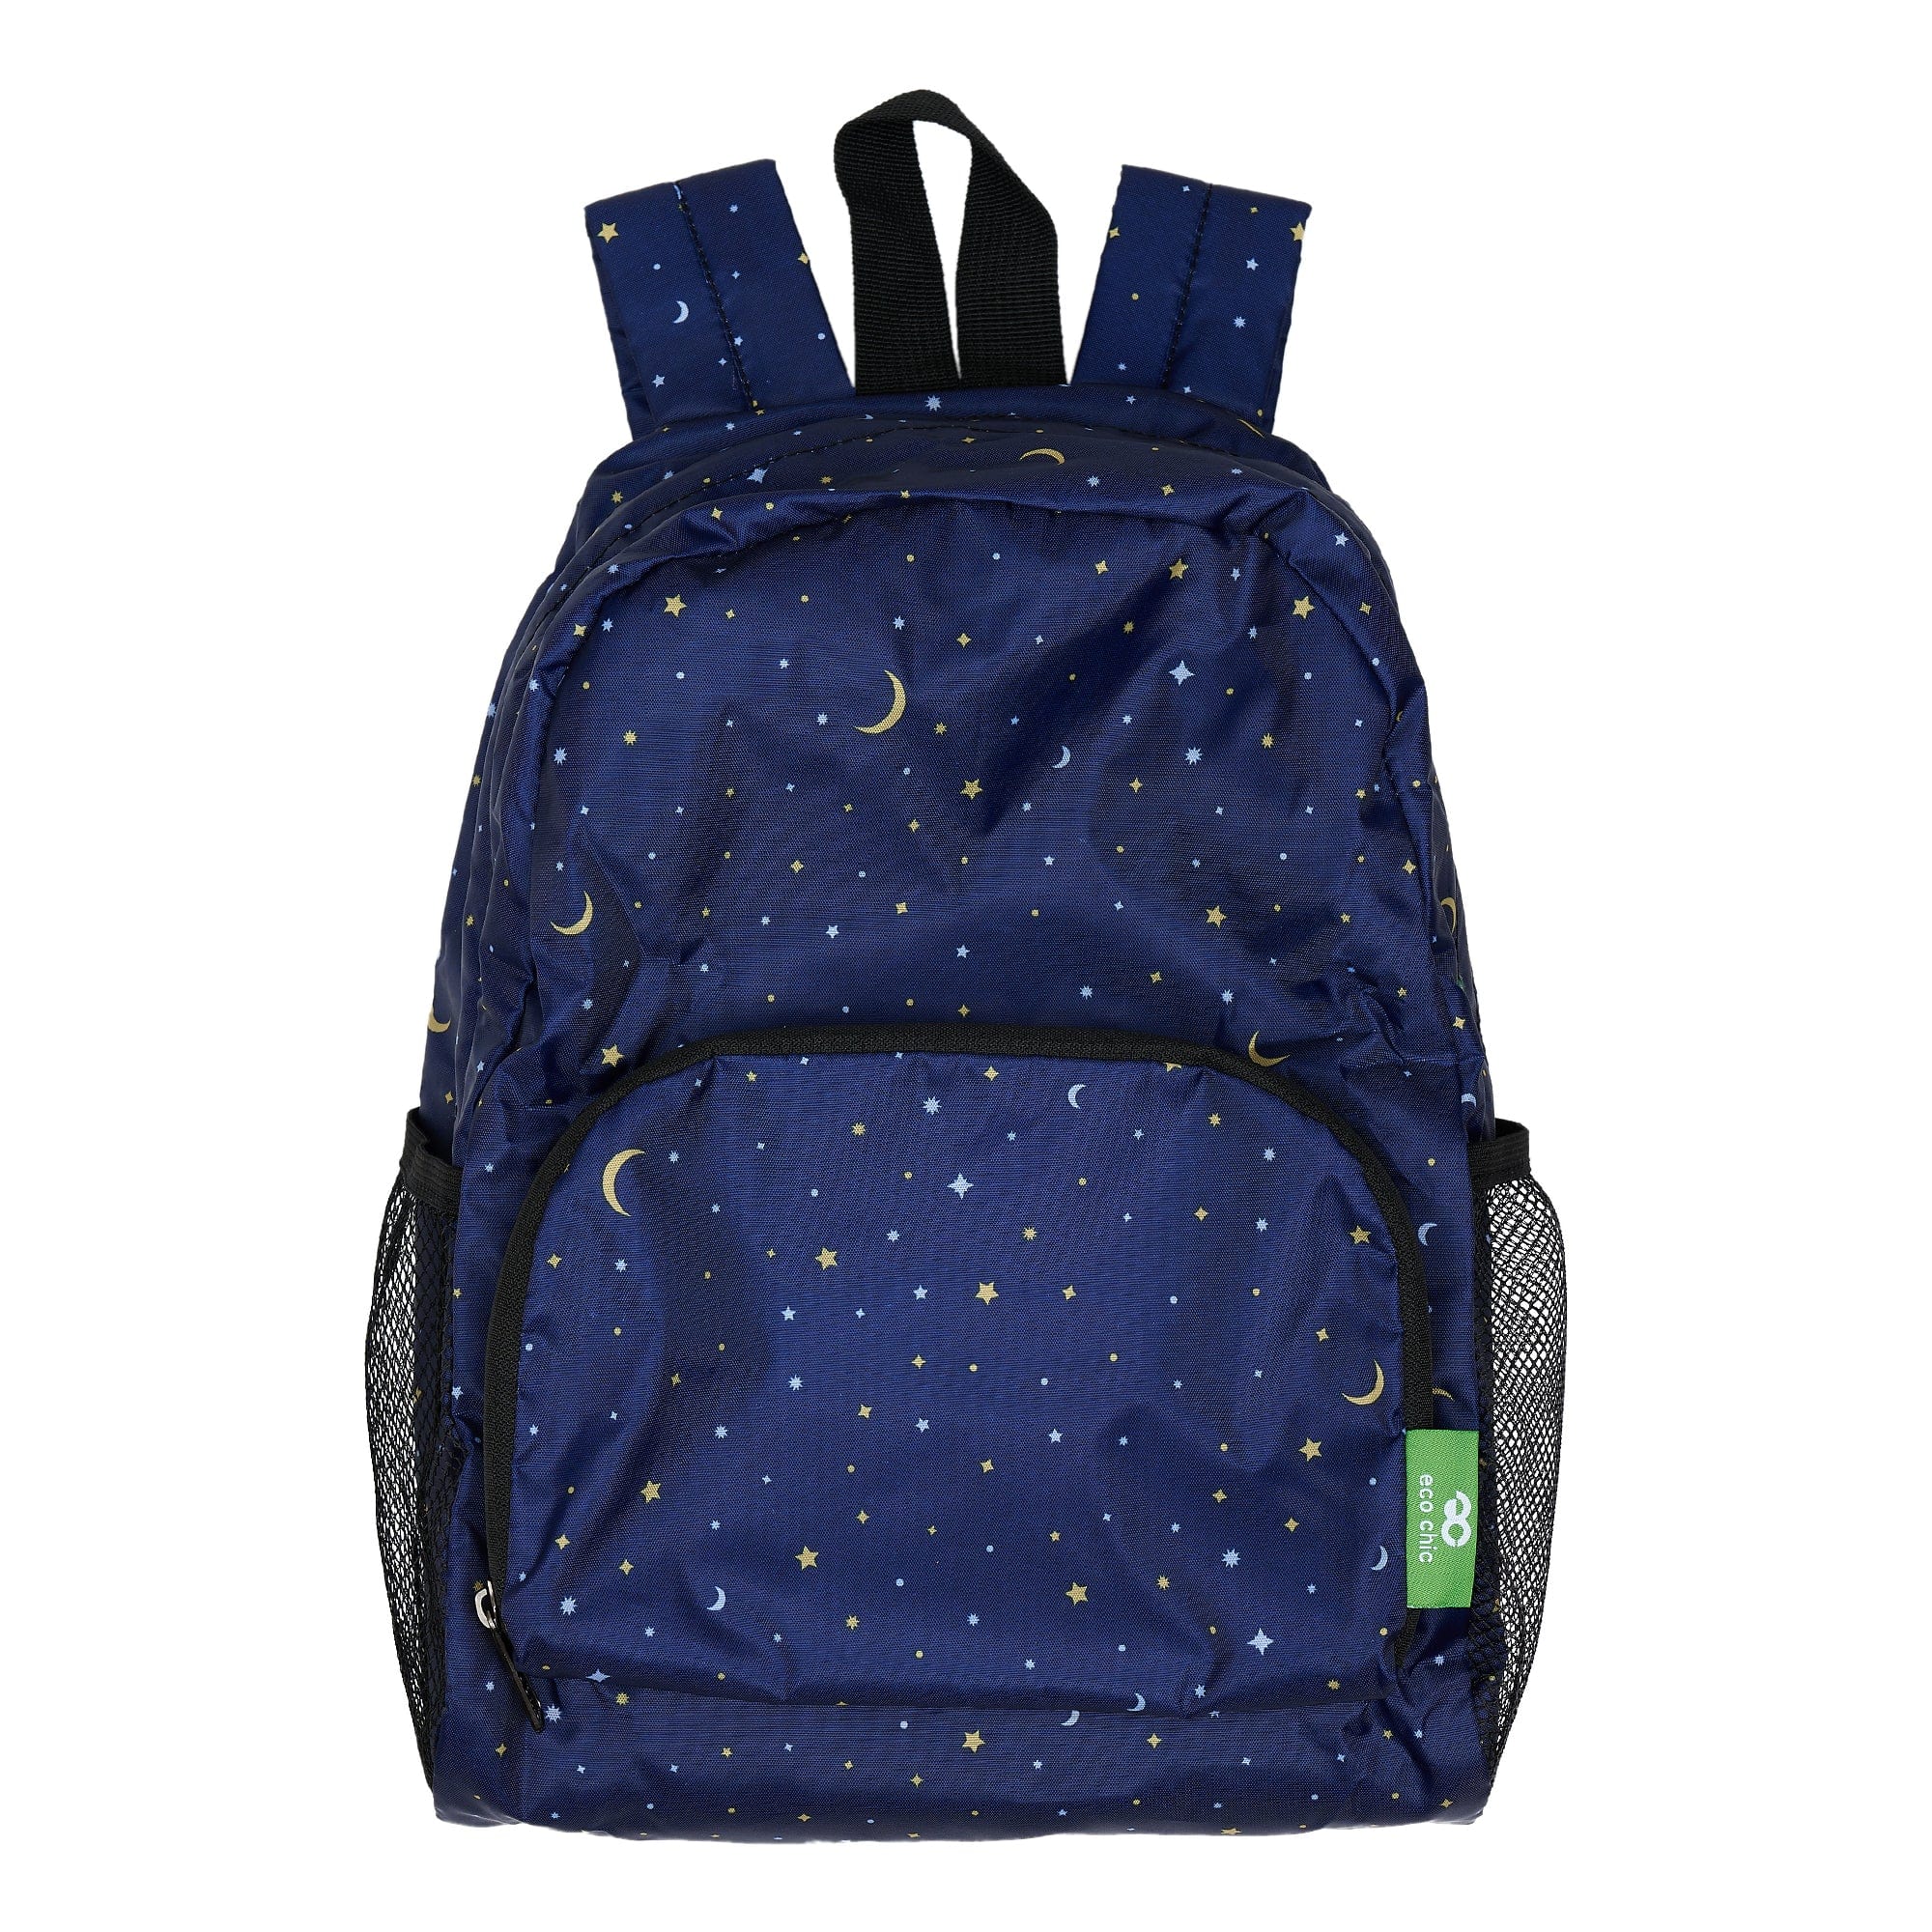 Eco Chic Navy Eco Chic Lightweight Foldable Mini Backpack Stars and Moons